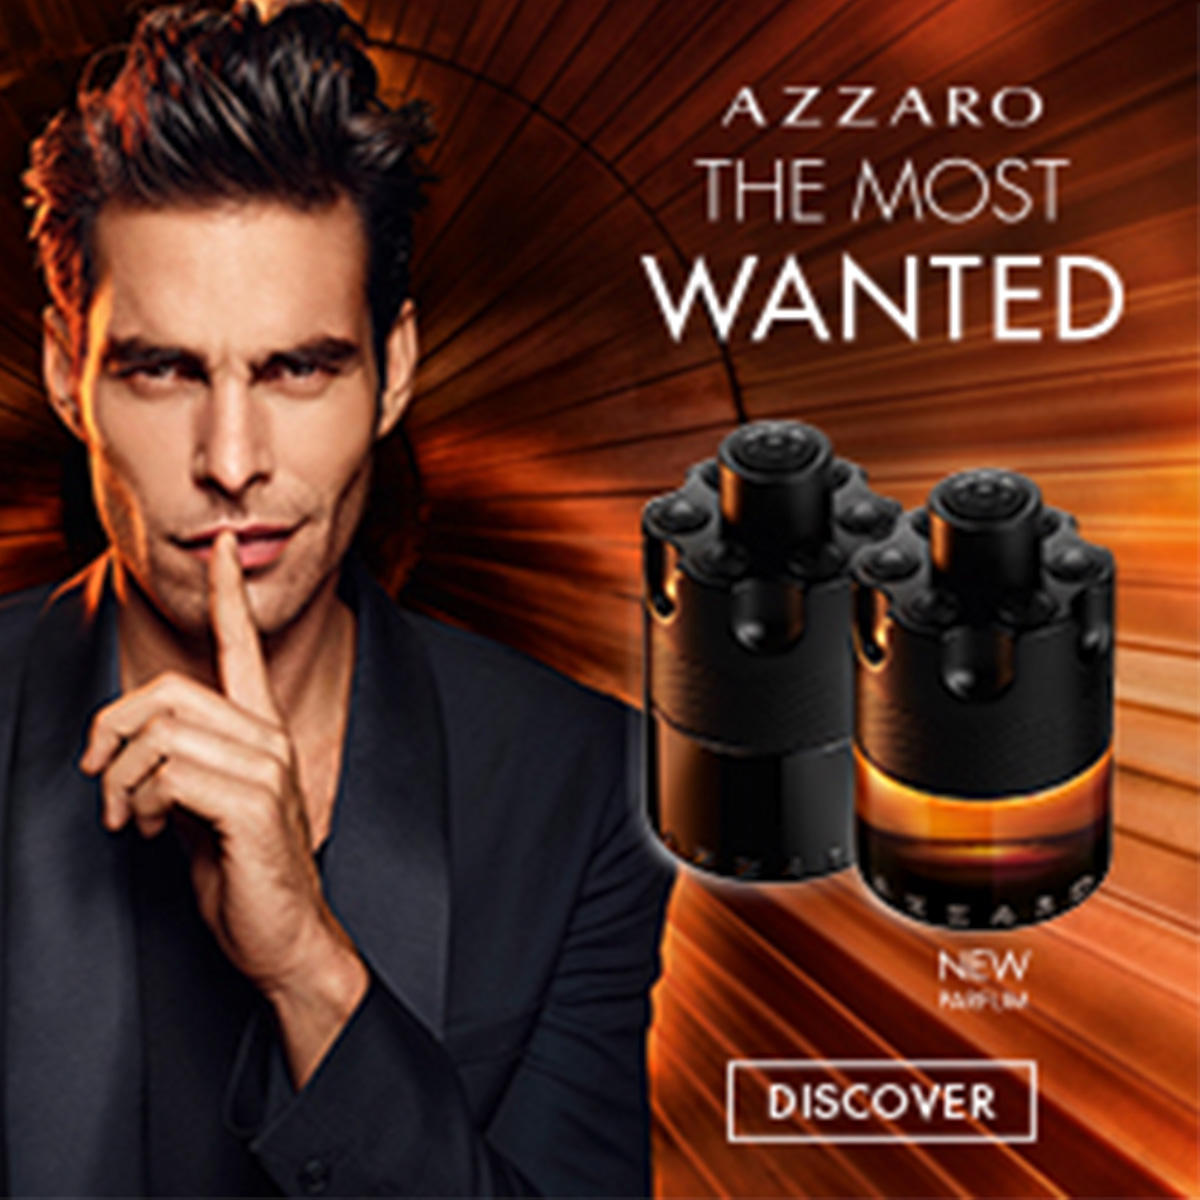 Azzaro Wanted The Most Le Parfum 100 ml - 3